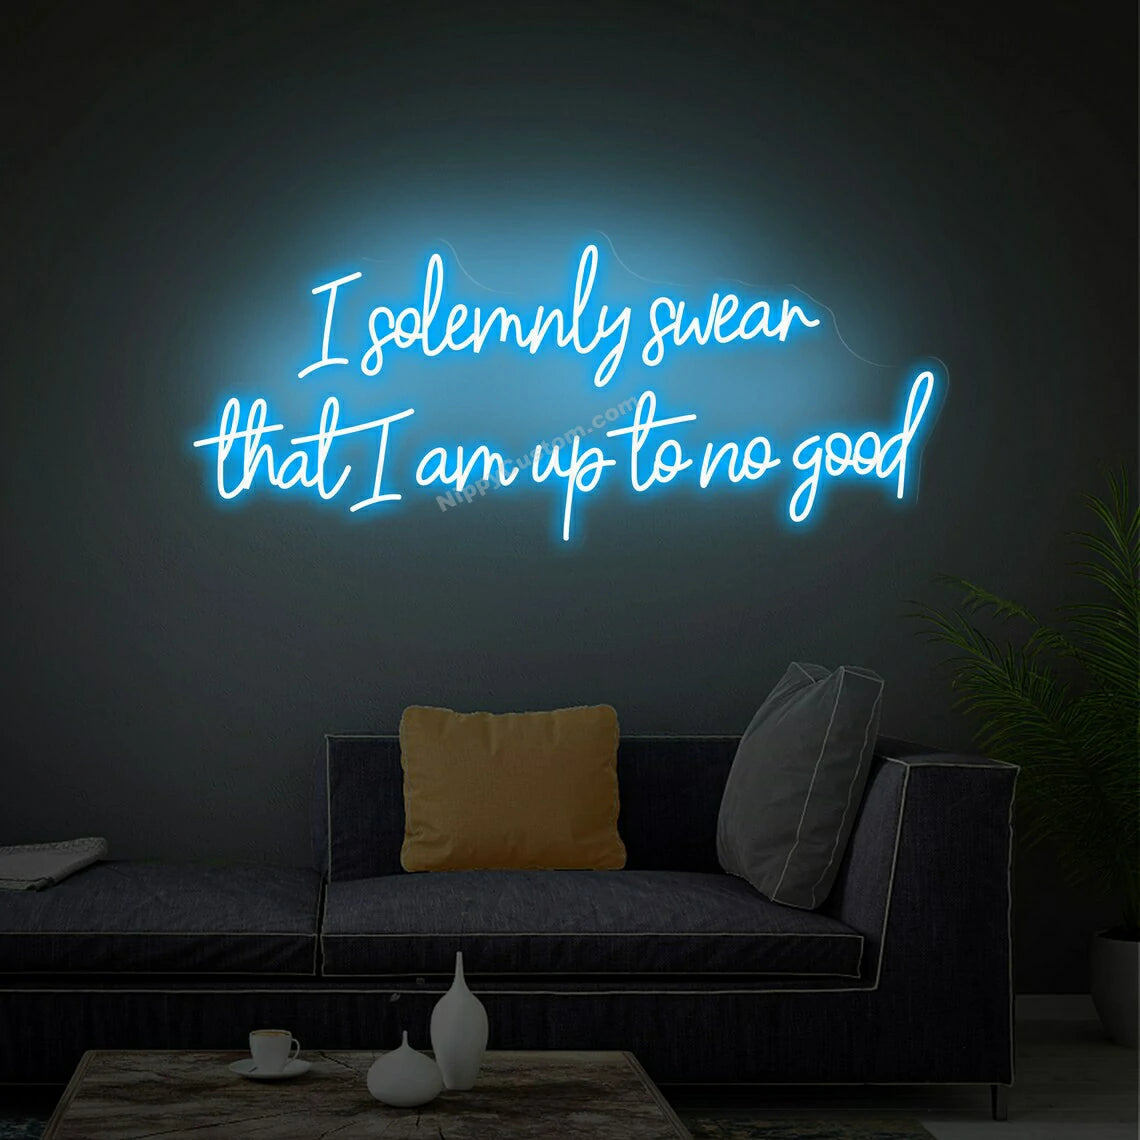 I solemnly swear that i am up to no good, Neon Sign Light, Custom Neon Sign Bedrooom Home Decor, Birthday Gift